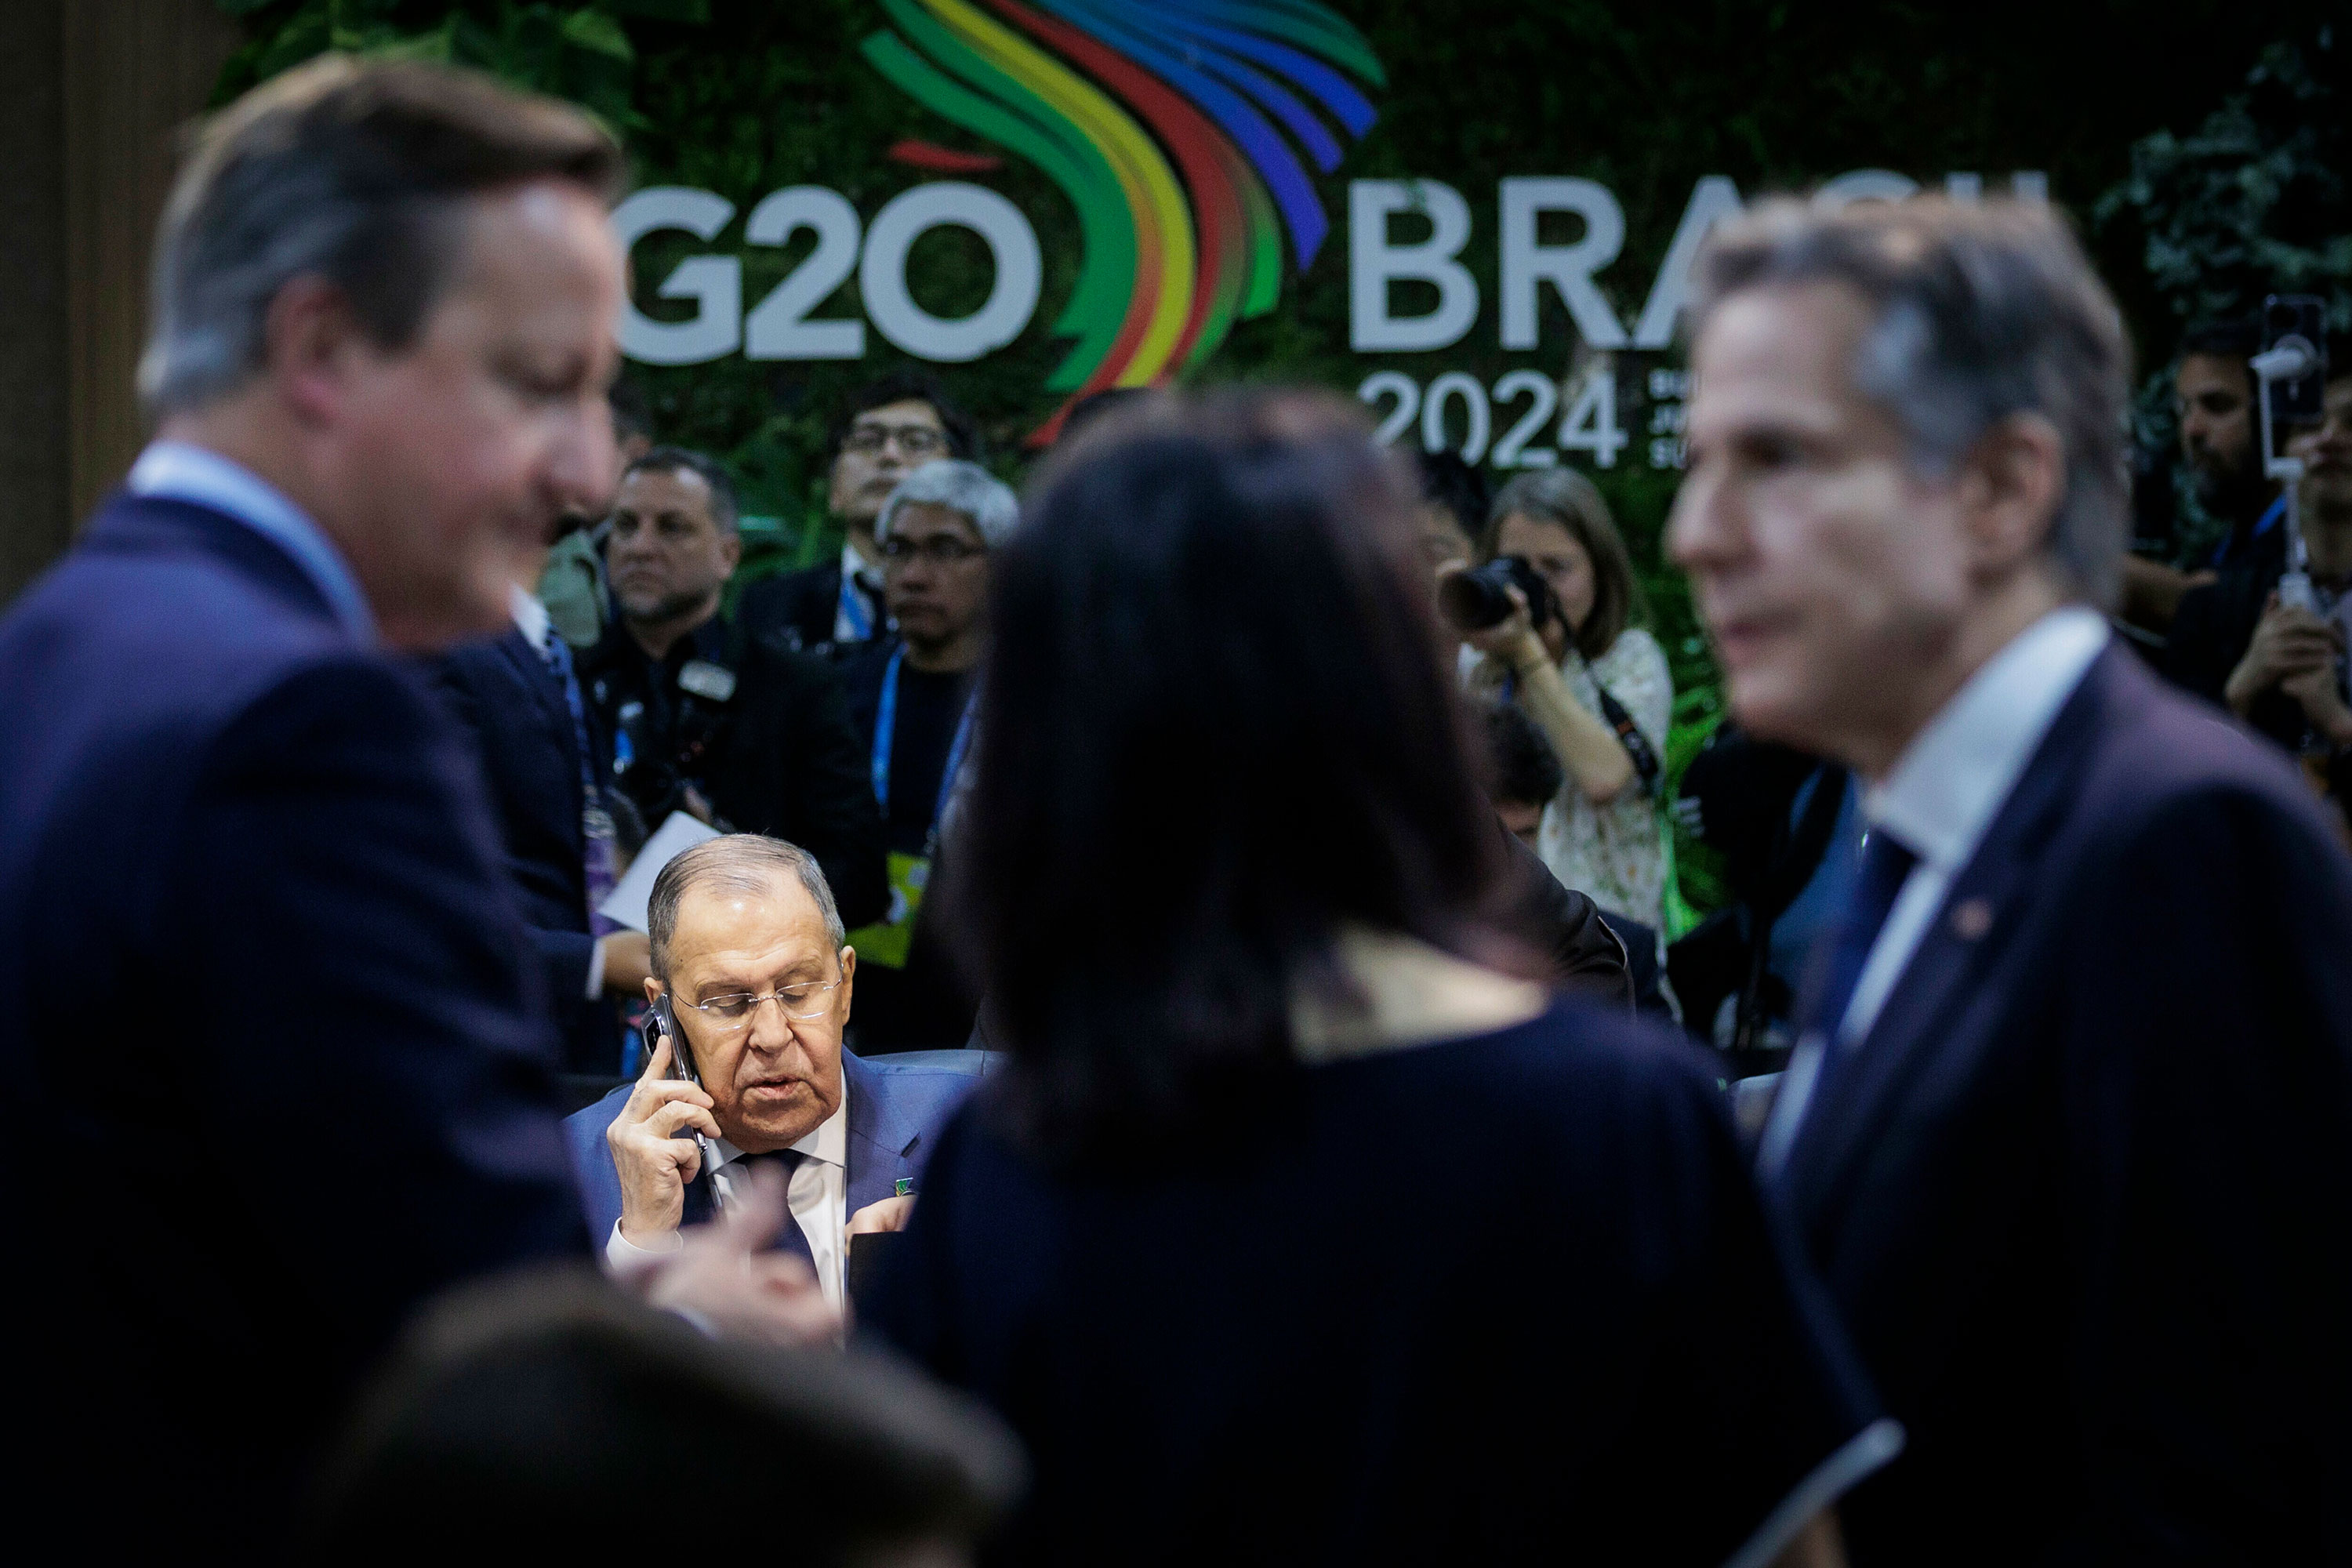 Russian Foreign Minister Sergey Lavrov talks on the phone during the G20 Foreign Ministers meeting Wednesday in Rio de Janeiro. In the foreground, Britain's Foreign Secretary David Cameron, German Foreign Minister Annalena Baerbock and US Secretary of State Antony Blinken speak to each other. 